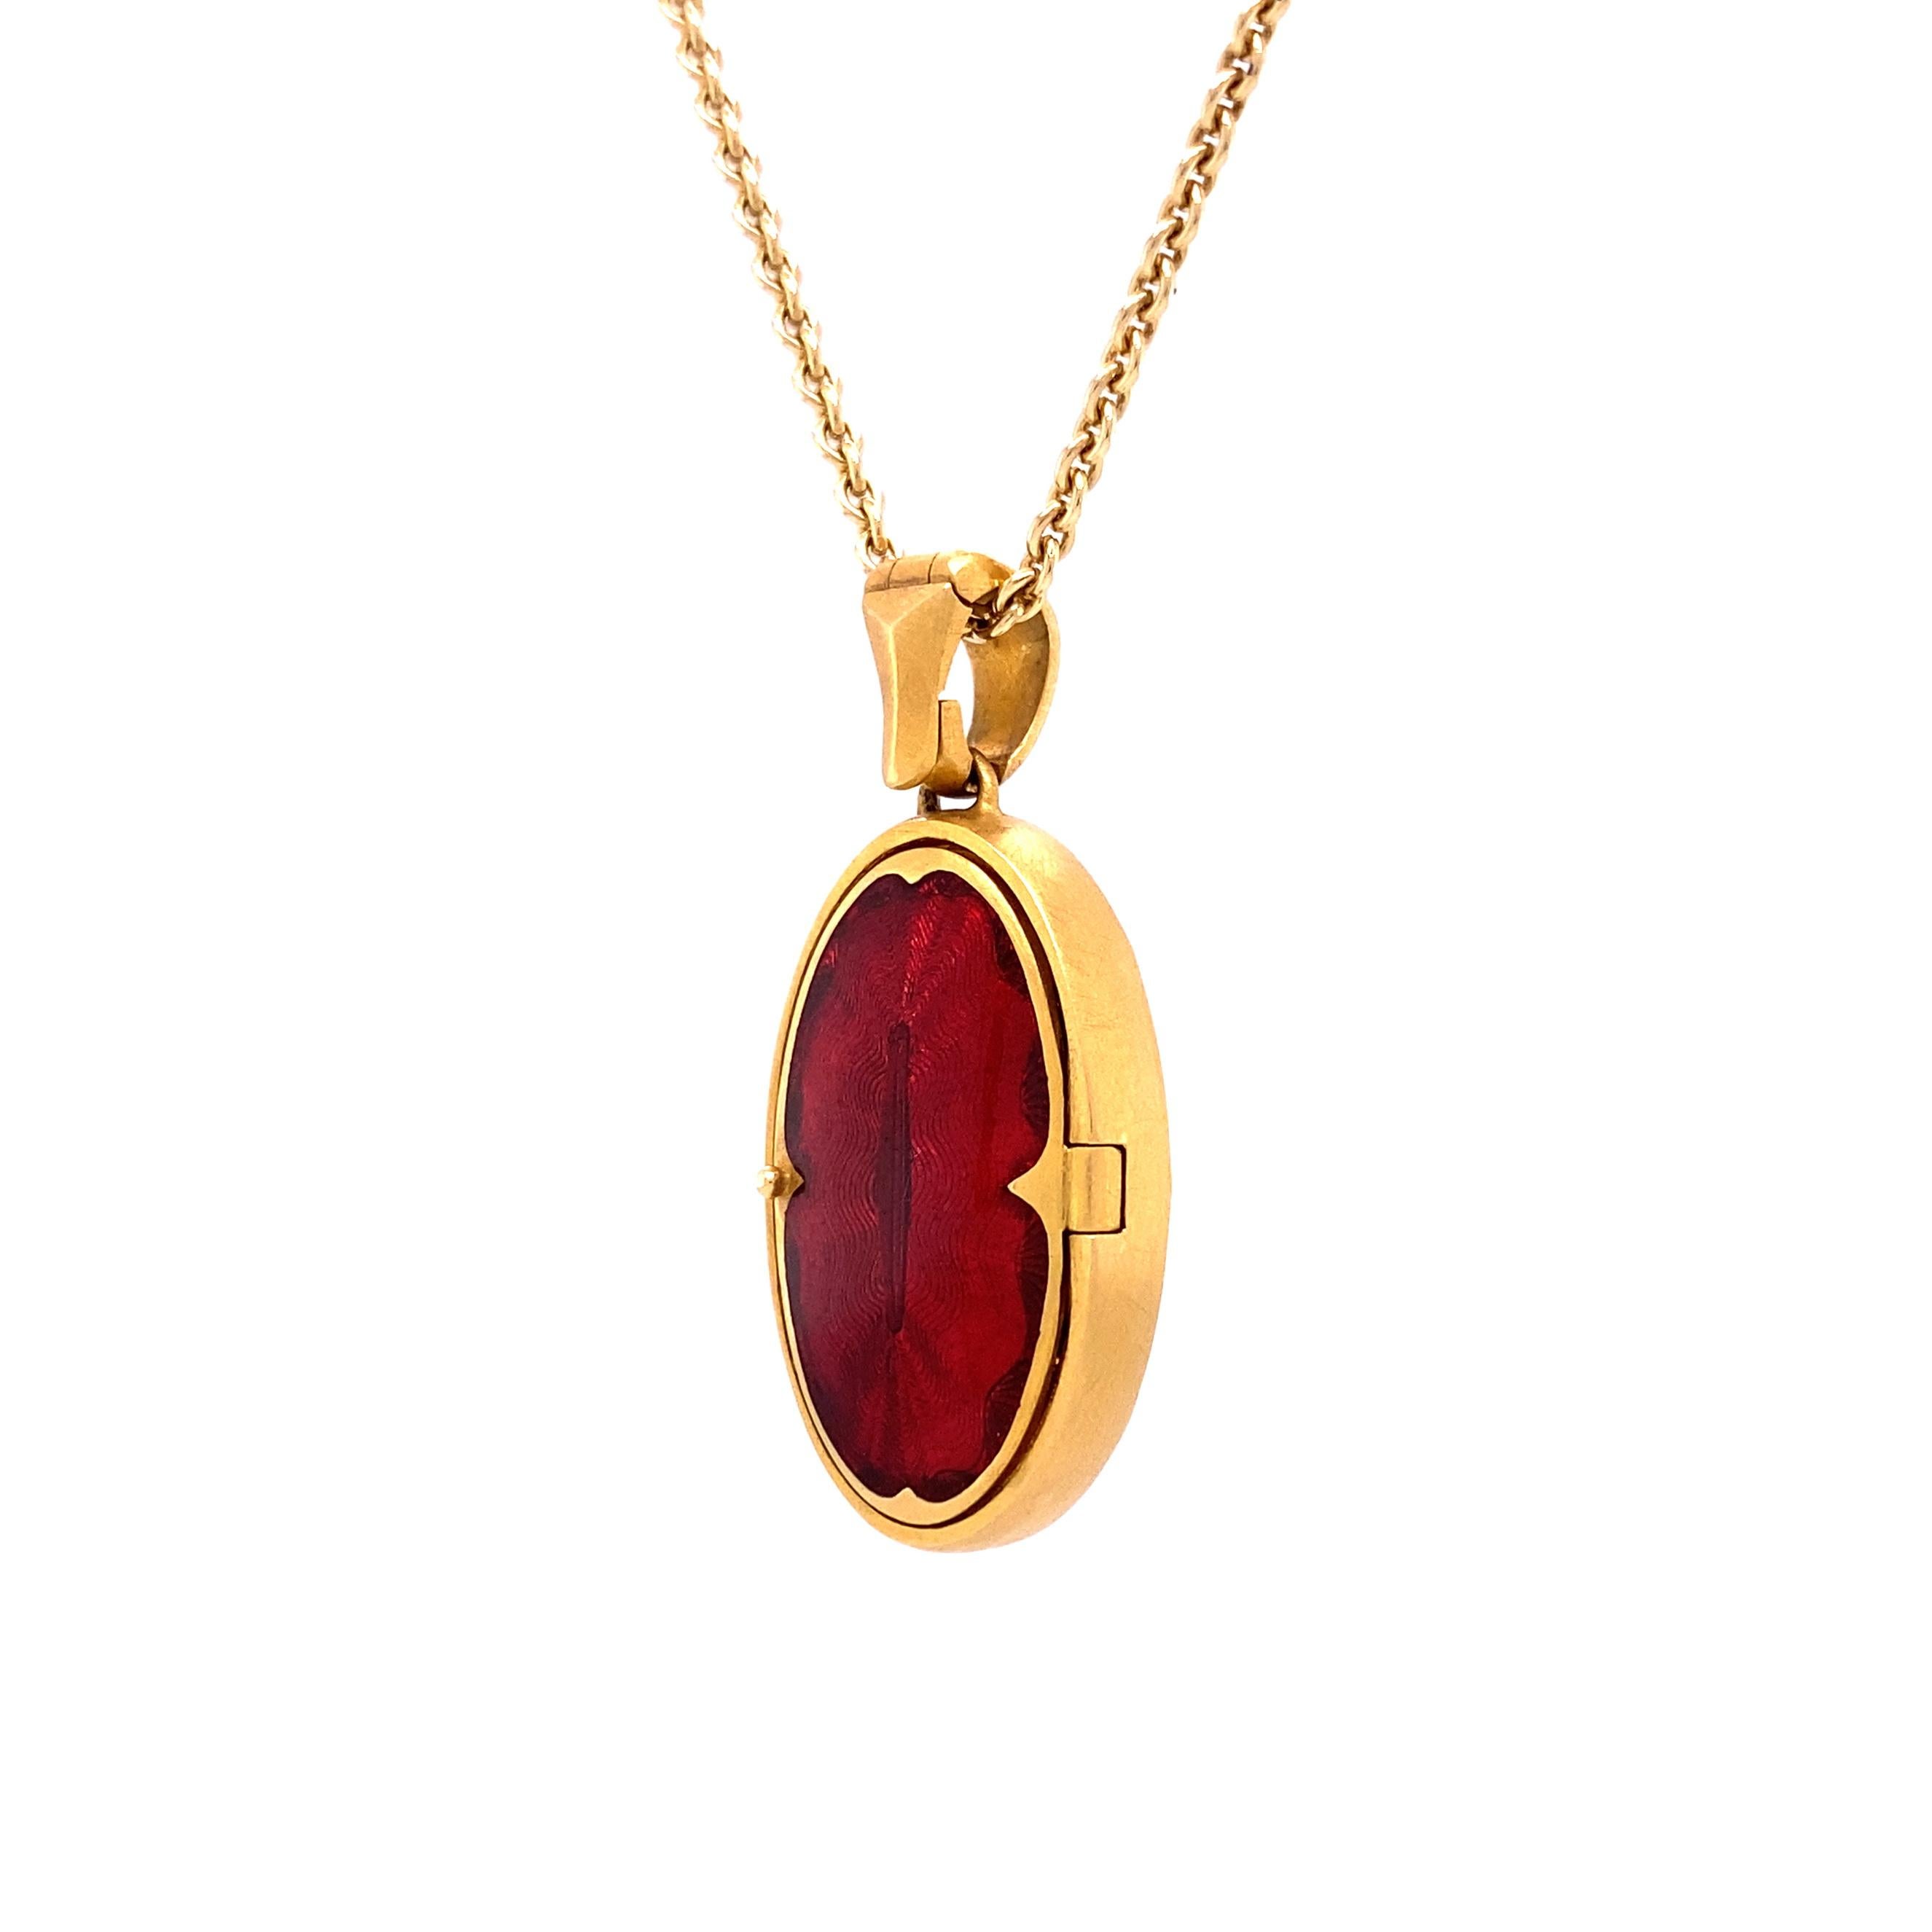 Oval Pendant Locket 18k Yellow Gold Red Guilloche Enamel Paillons 26.0 x 15.5 mm For Sale 1